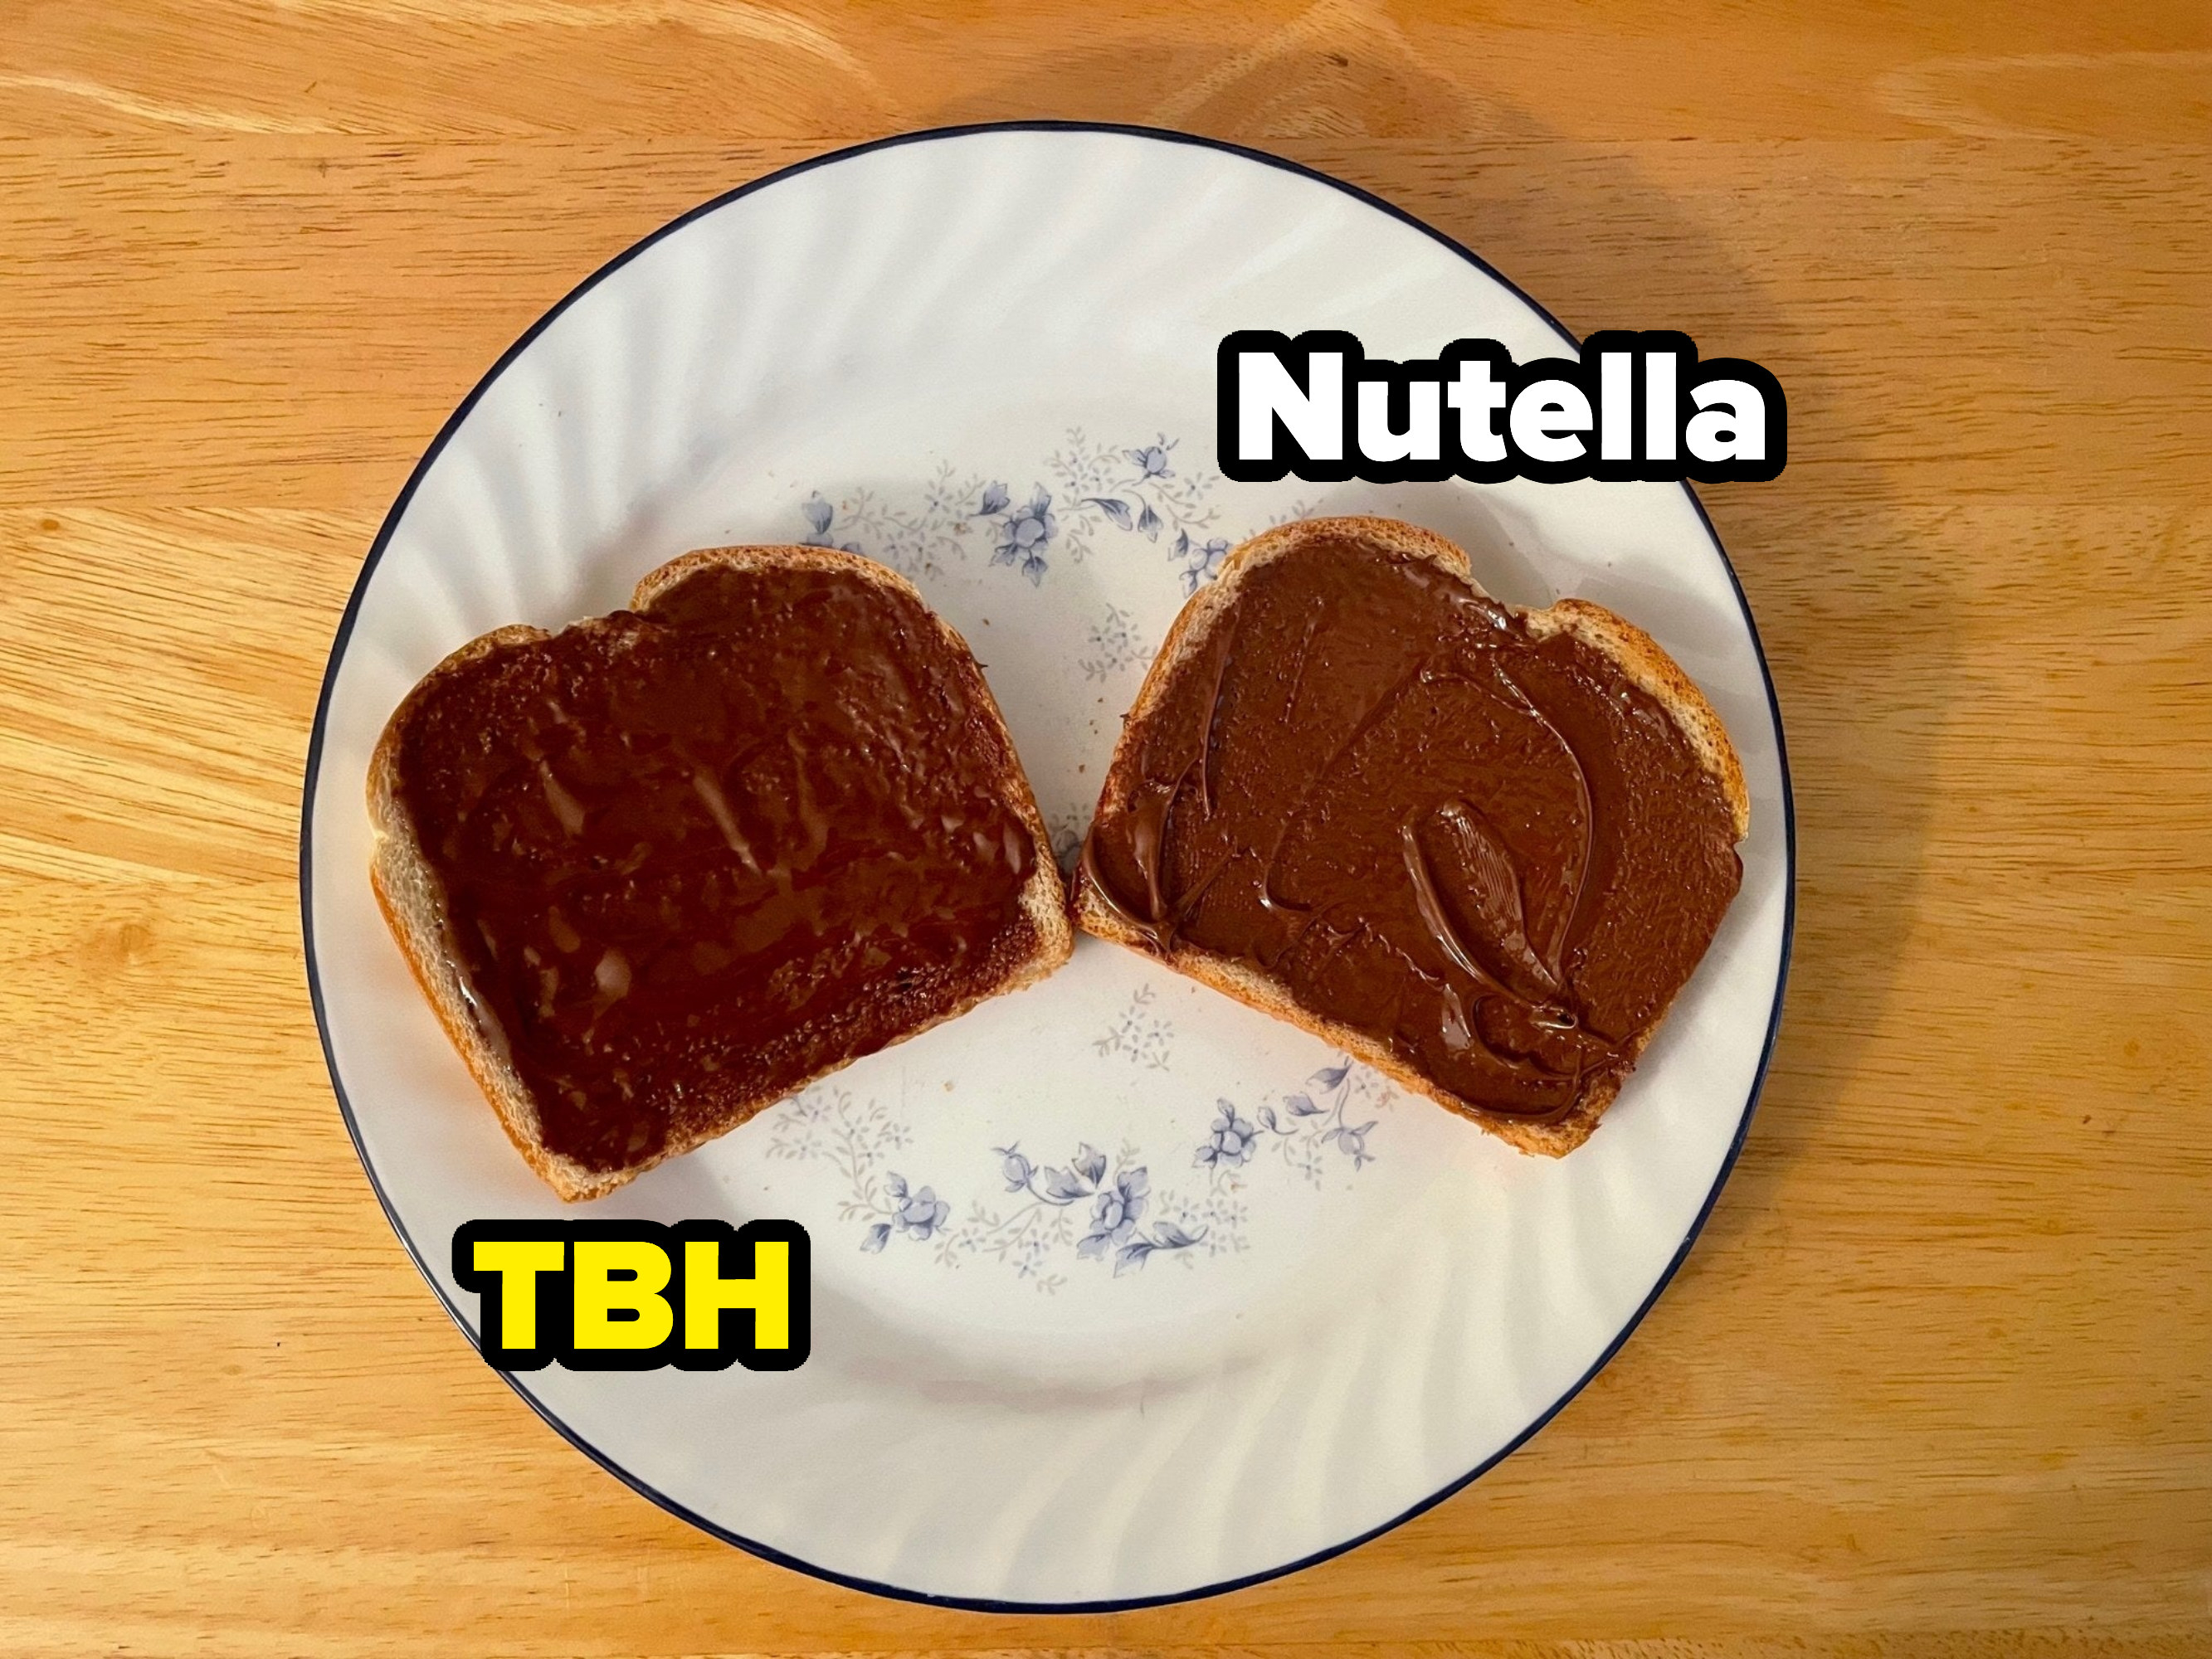 toast with TBH and one with nutella on a plate